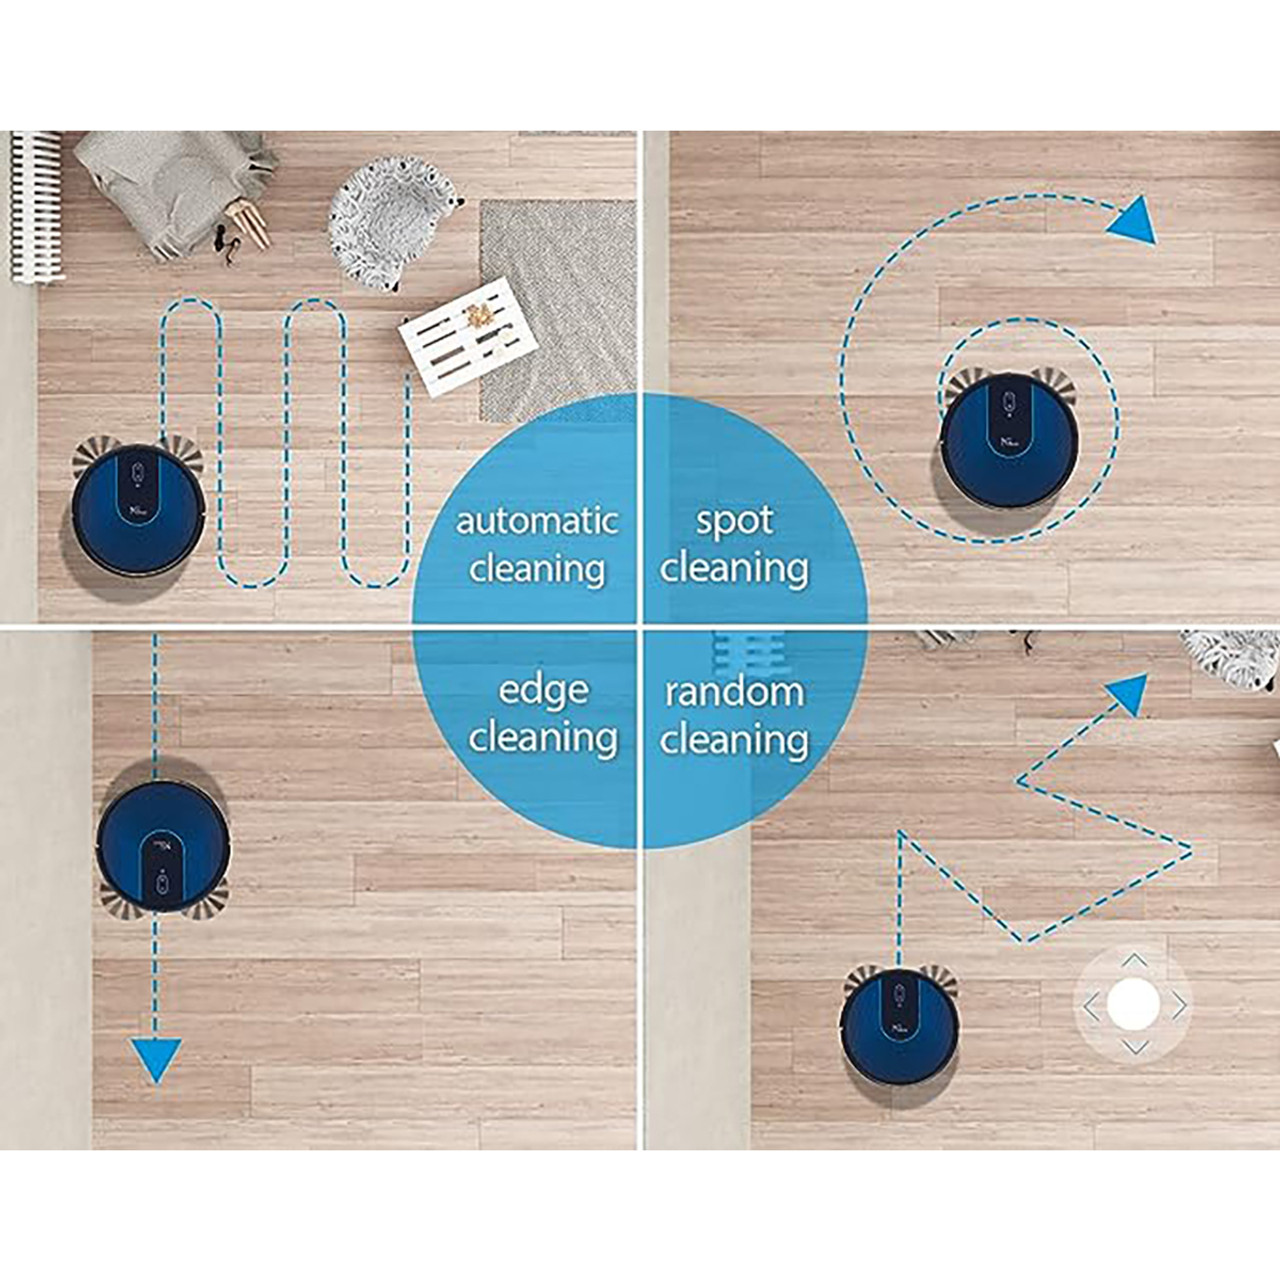 NGTeco™ Wi-Fi Robot Vacuum Cleaner product image